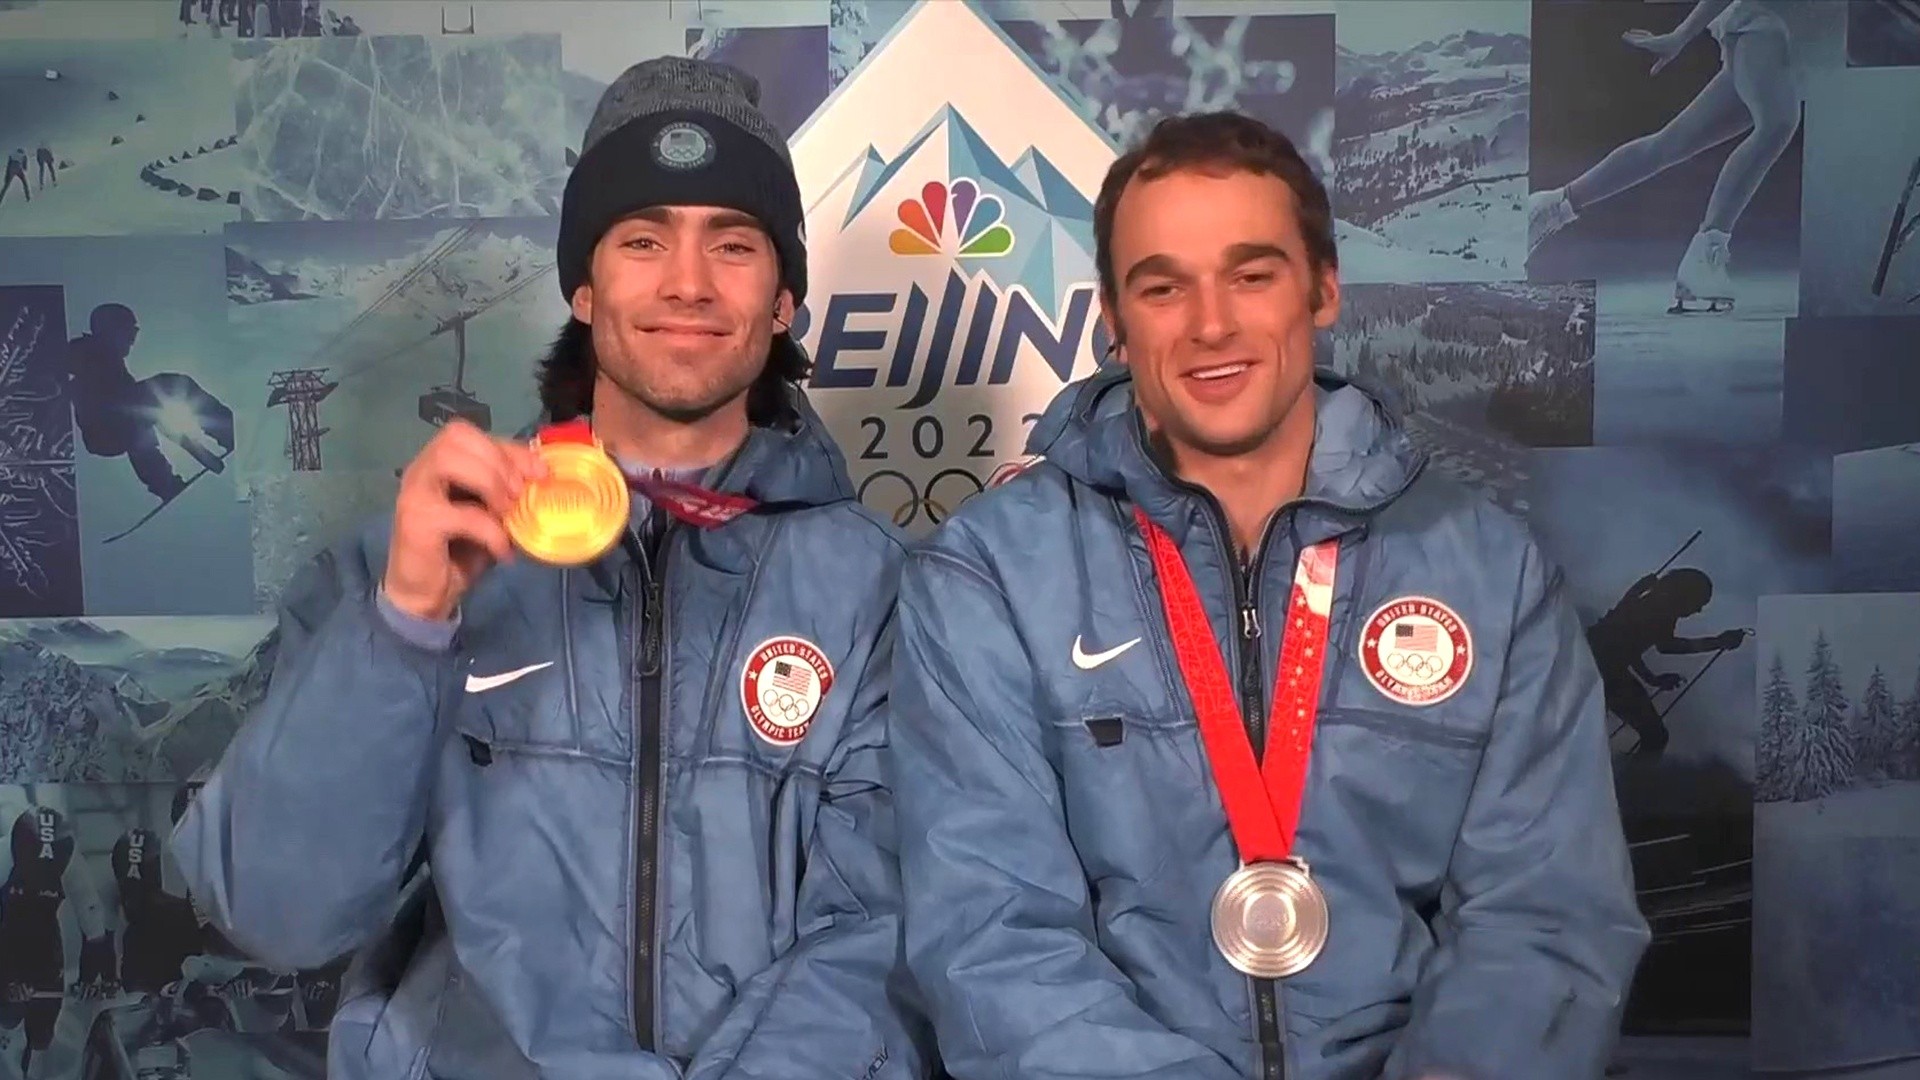 winter olympic medals 2022